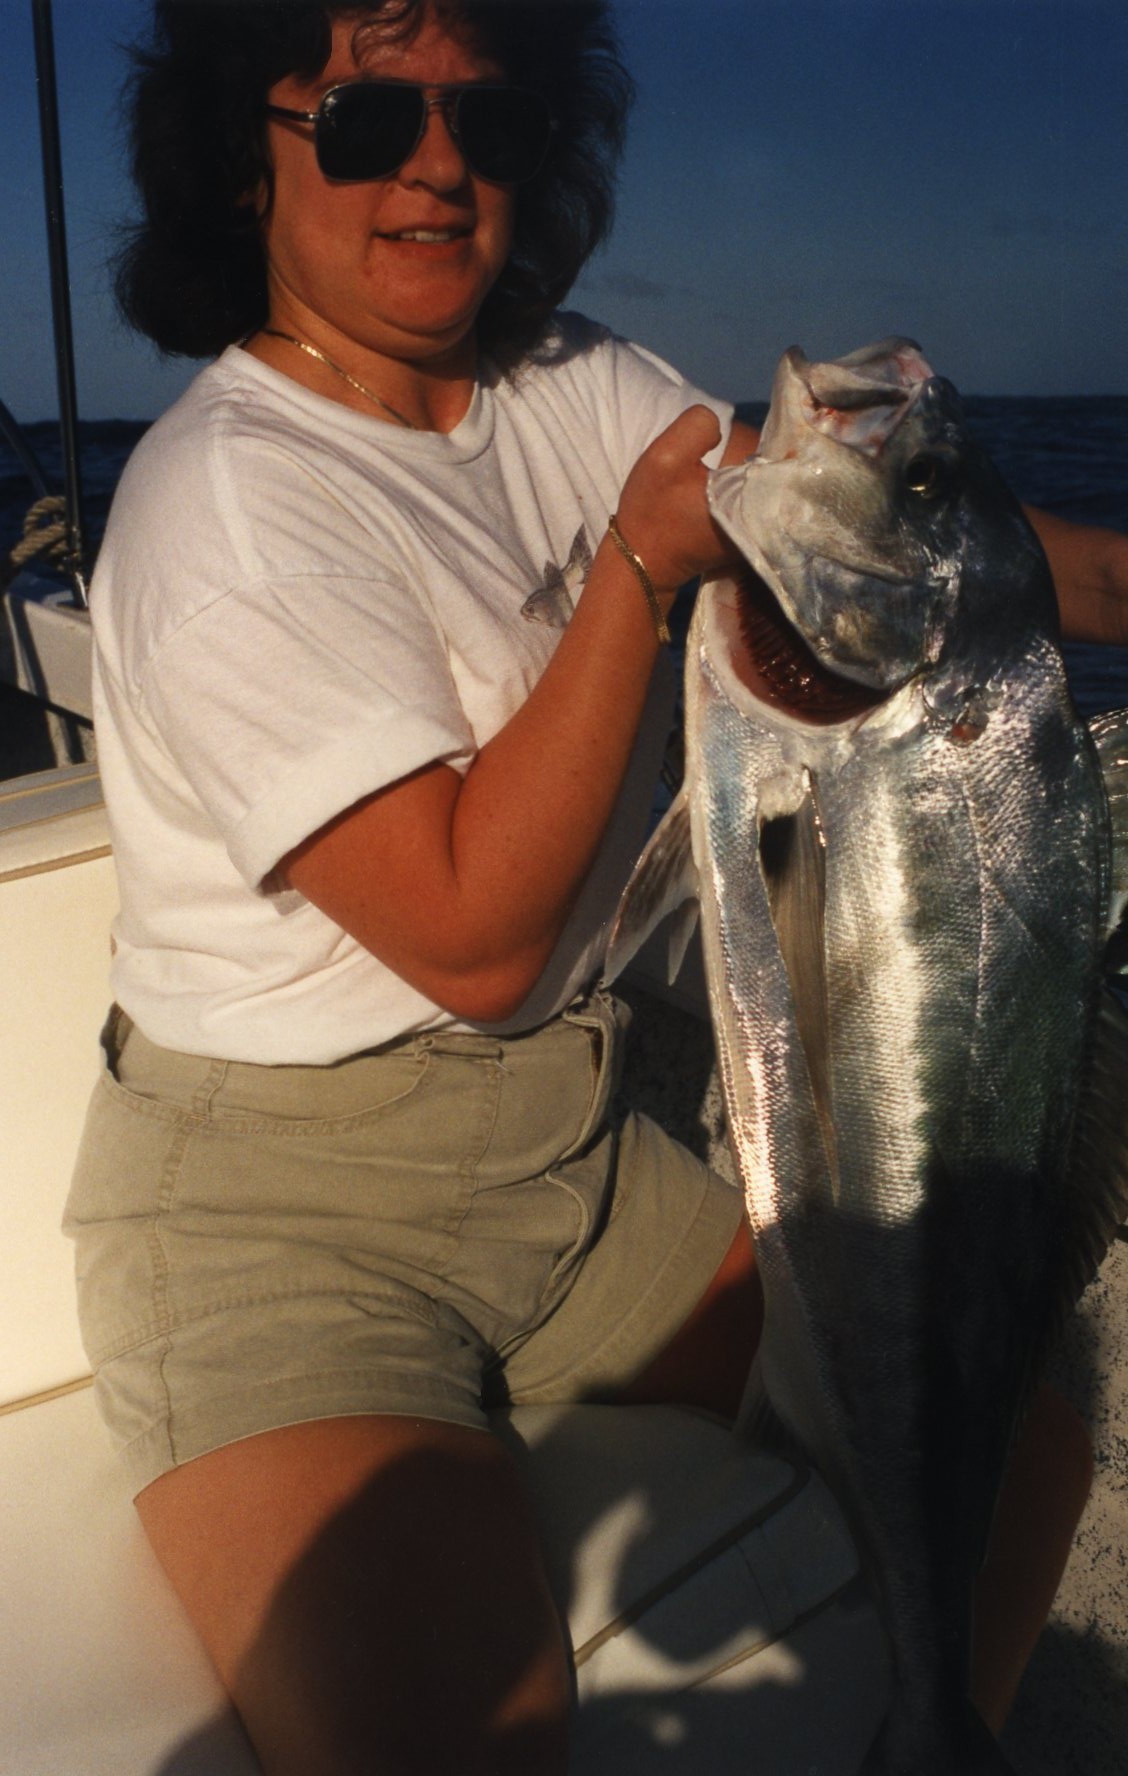 Image of Roosterfish